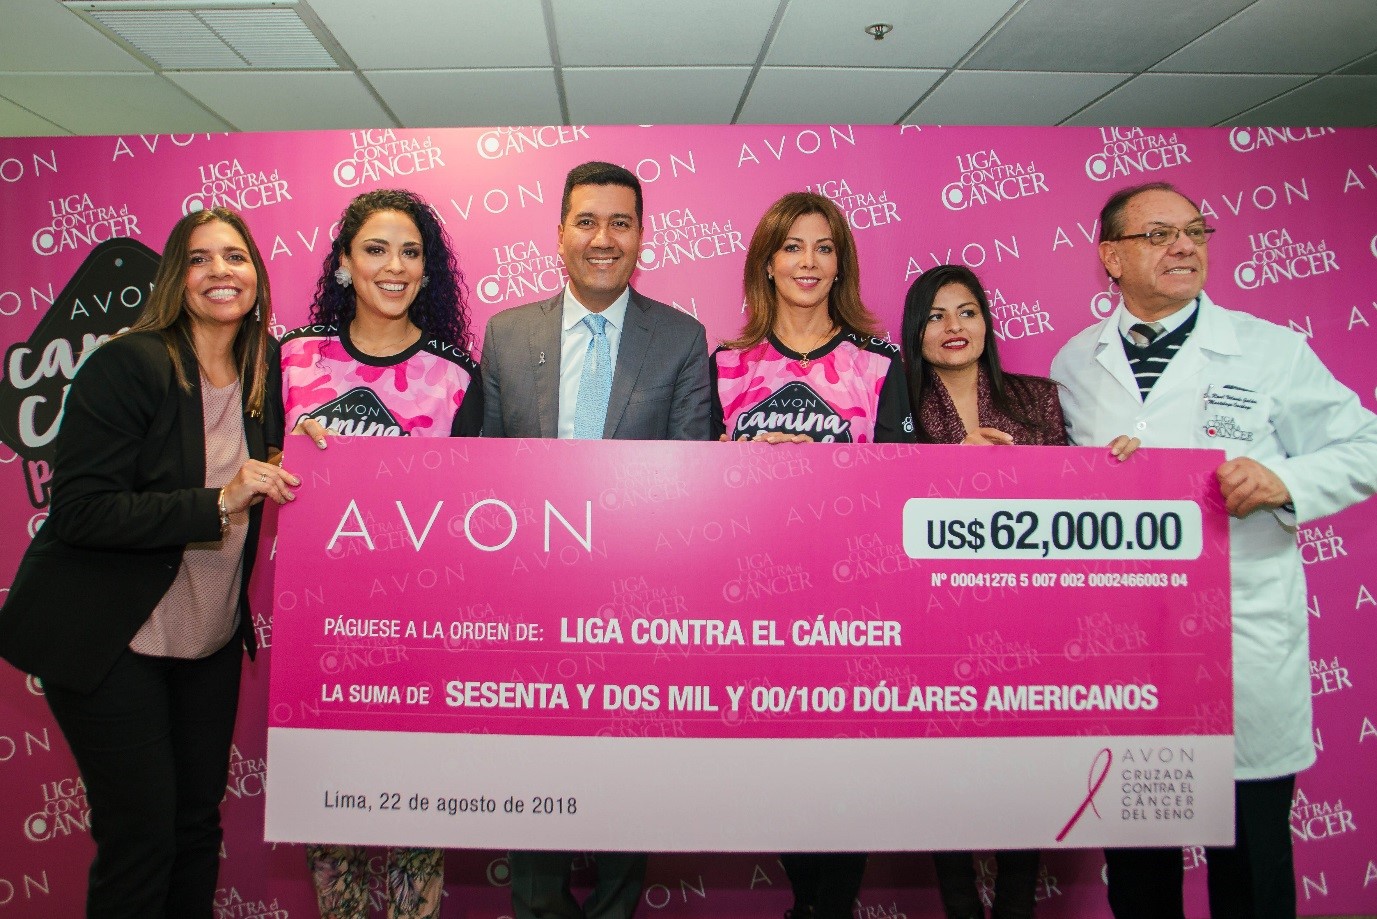 Avon Peru continues to drive charge to fight breast cancer in the country